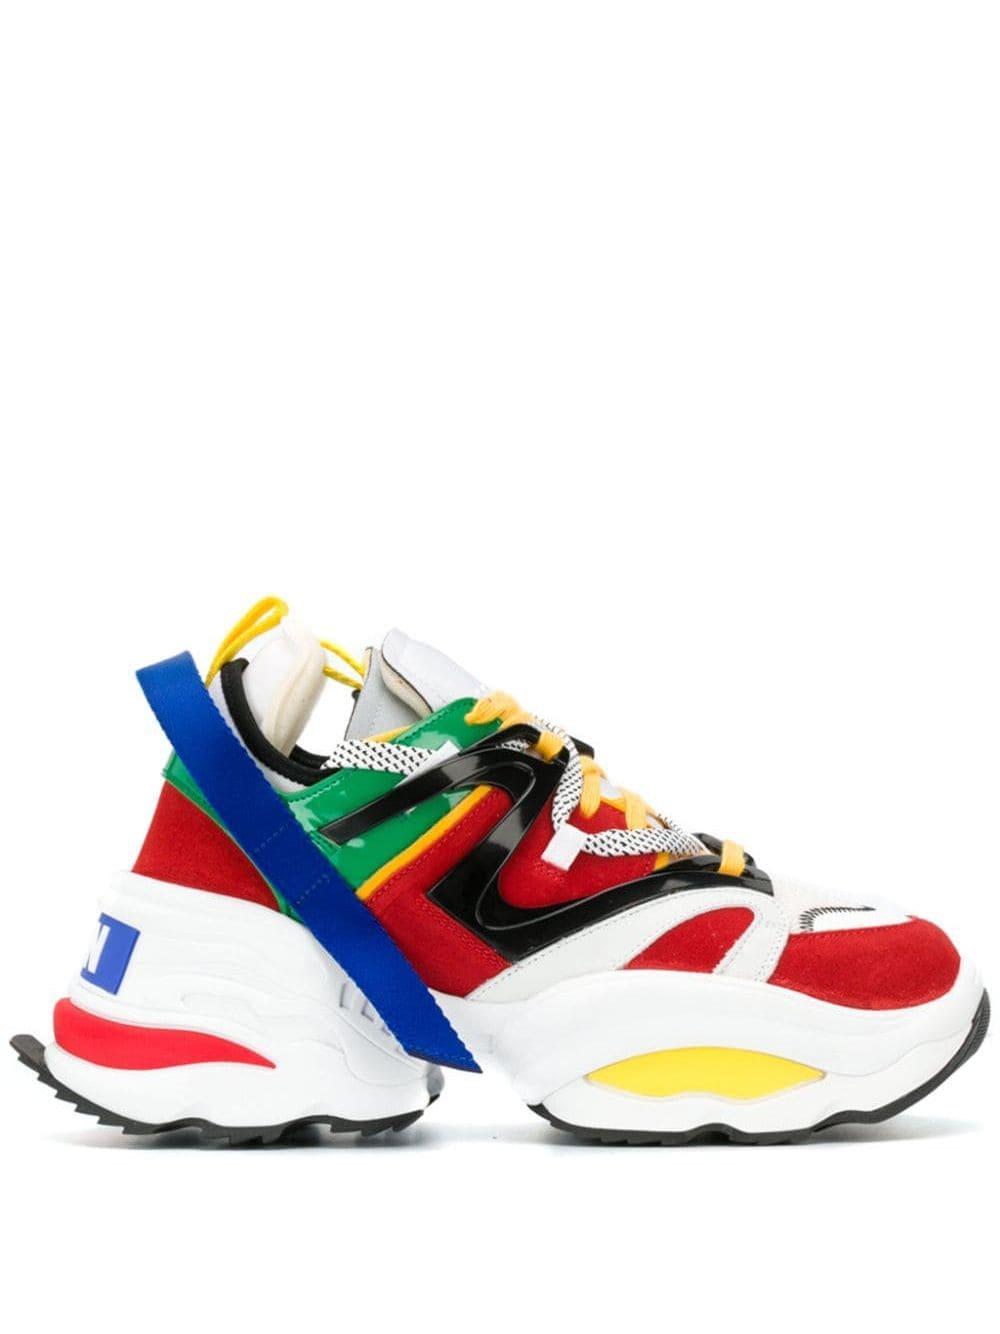 DSquared² Leather Backyard Punk The Giant Sneakers in White for Men | Lyst